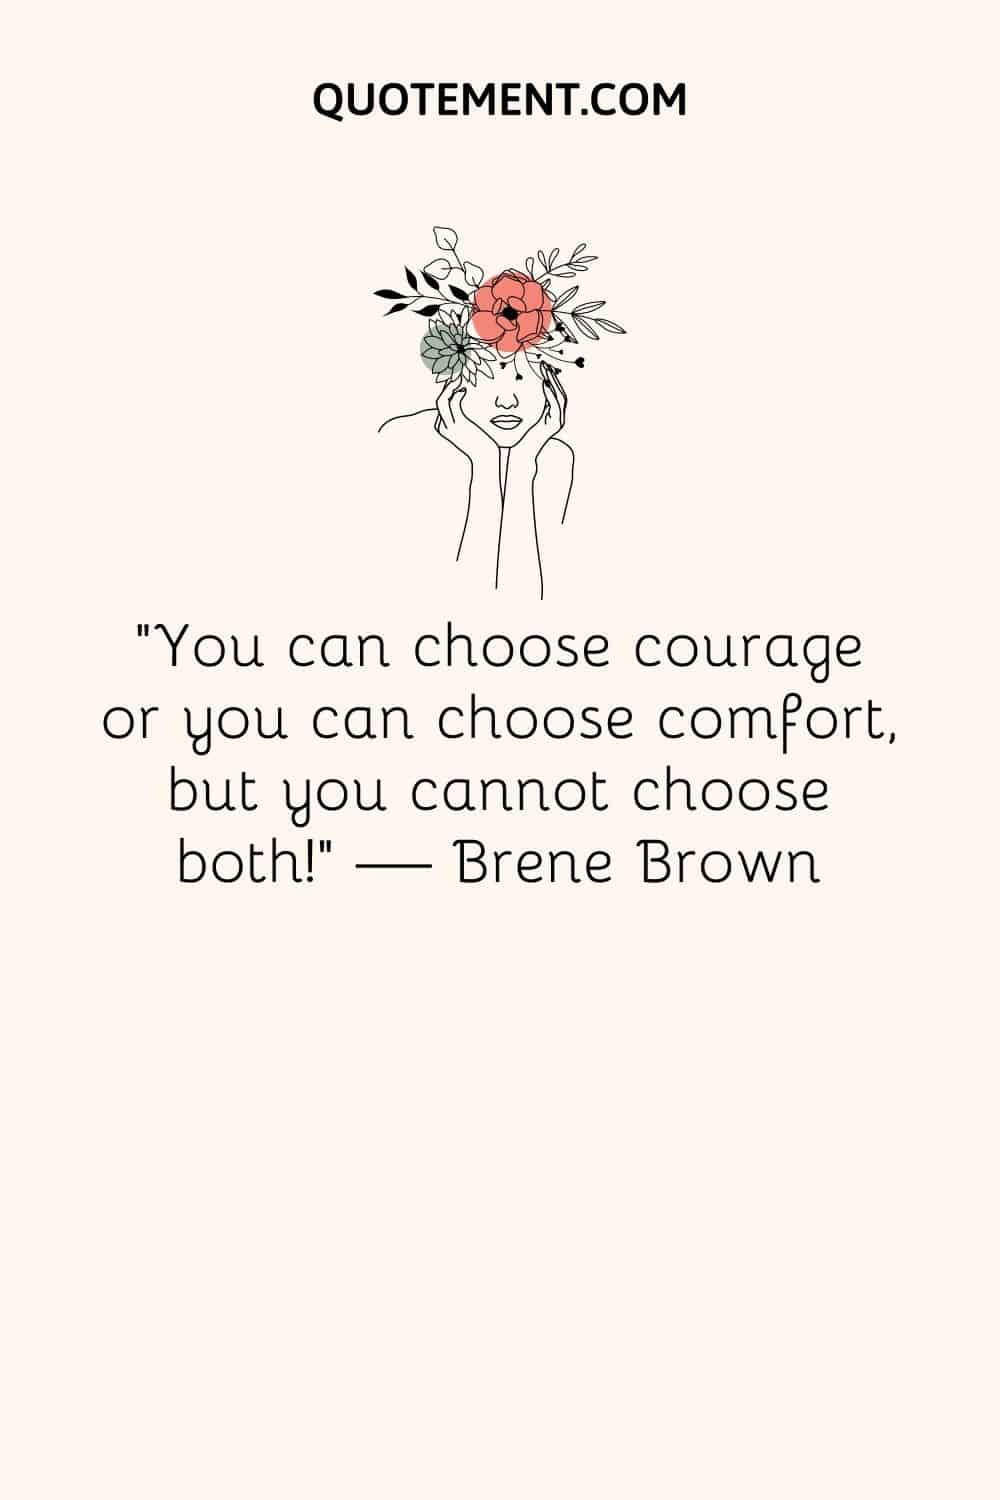 “You can choose courage or you can choose comfort, but you cannot choose both!” ― Brene Brown